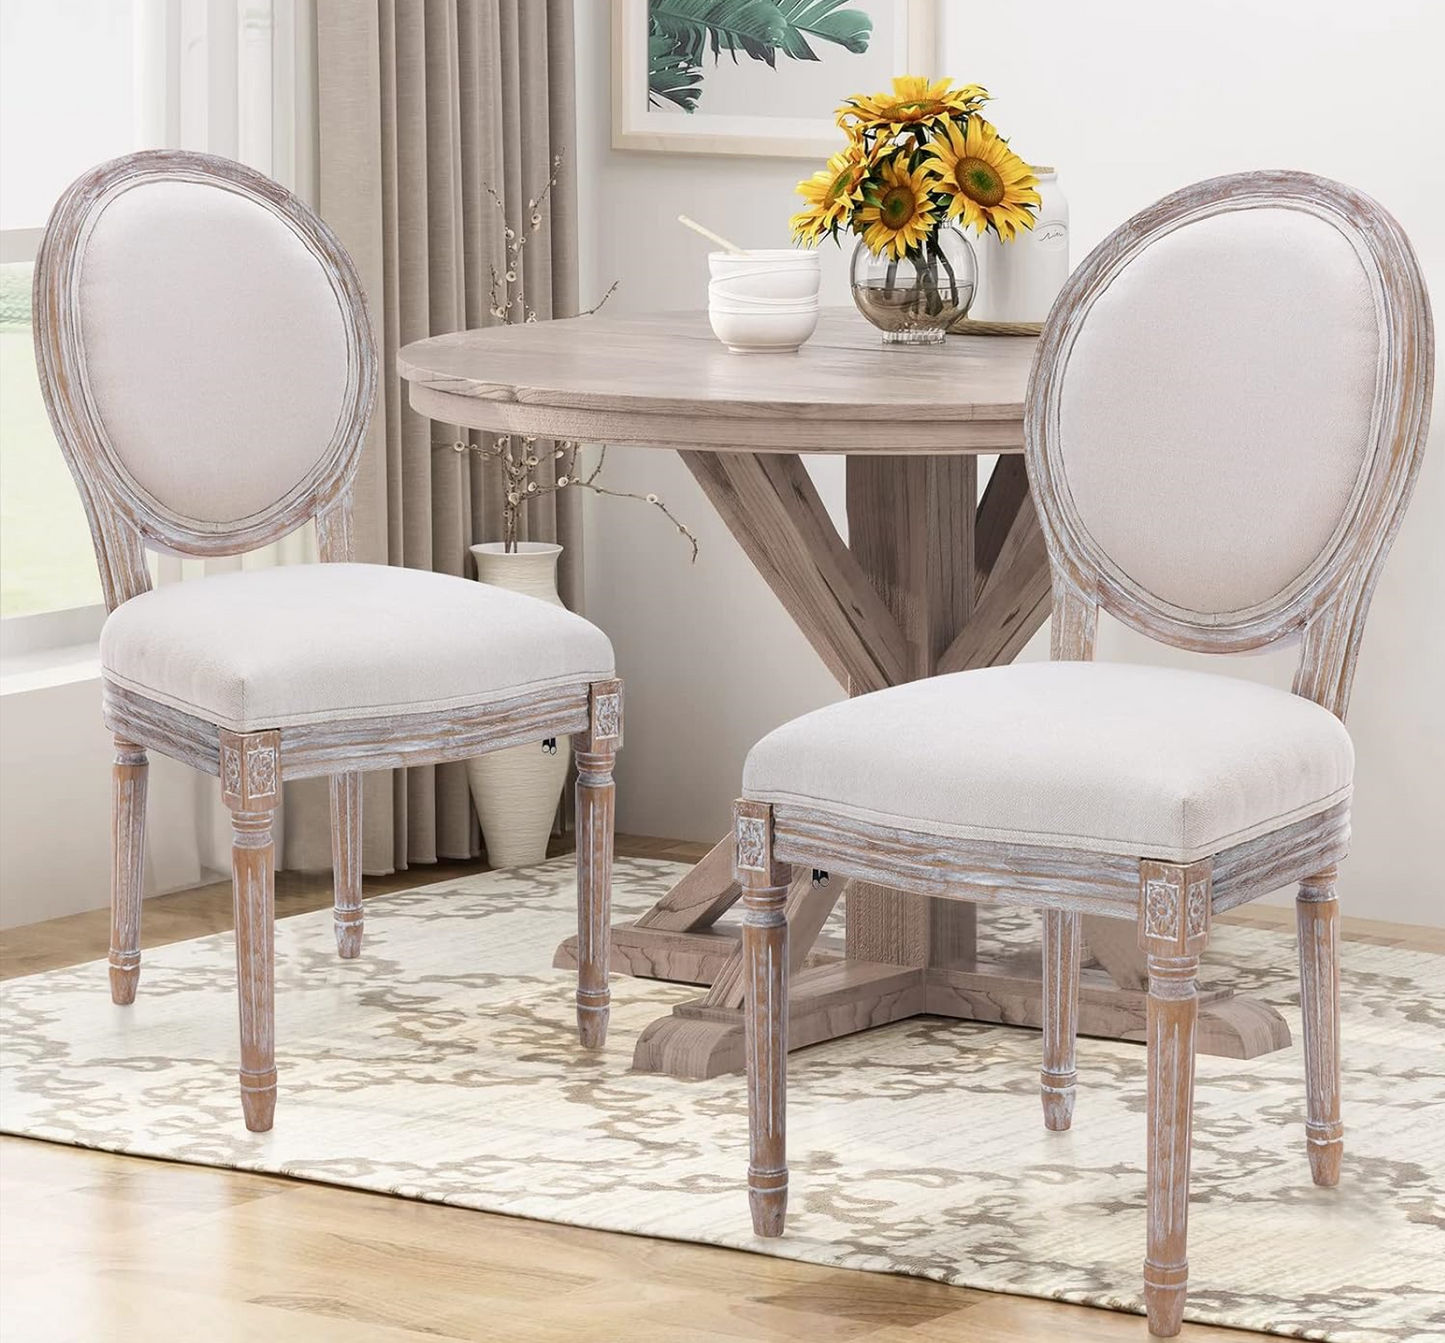 French Country Vintage Dining Chairs with Round Back, Set of 2, Solid Wood Legs, Accent Side, Upholstered for Farmhouse, Dining Room, Kitchen/Living Room/Bedroom-Classic Beige